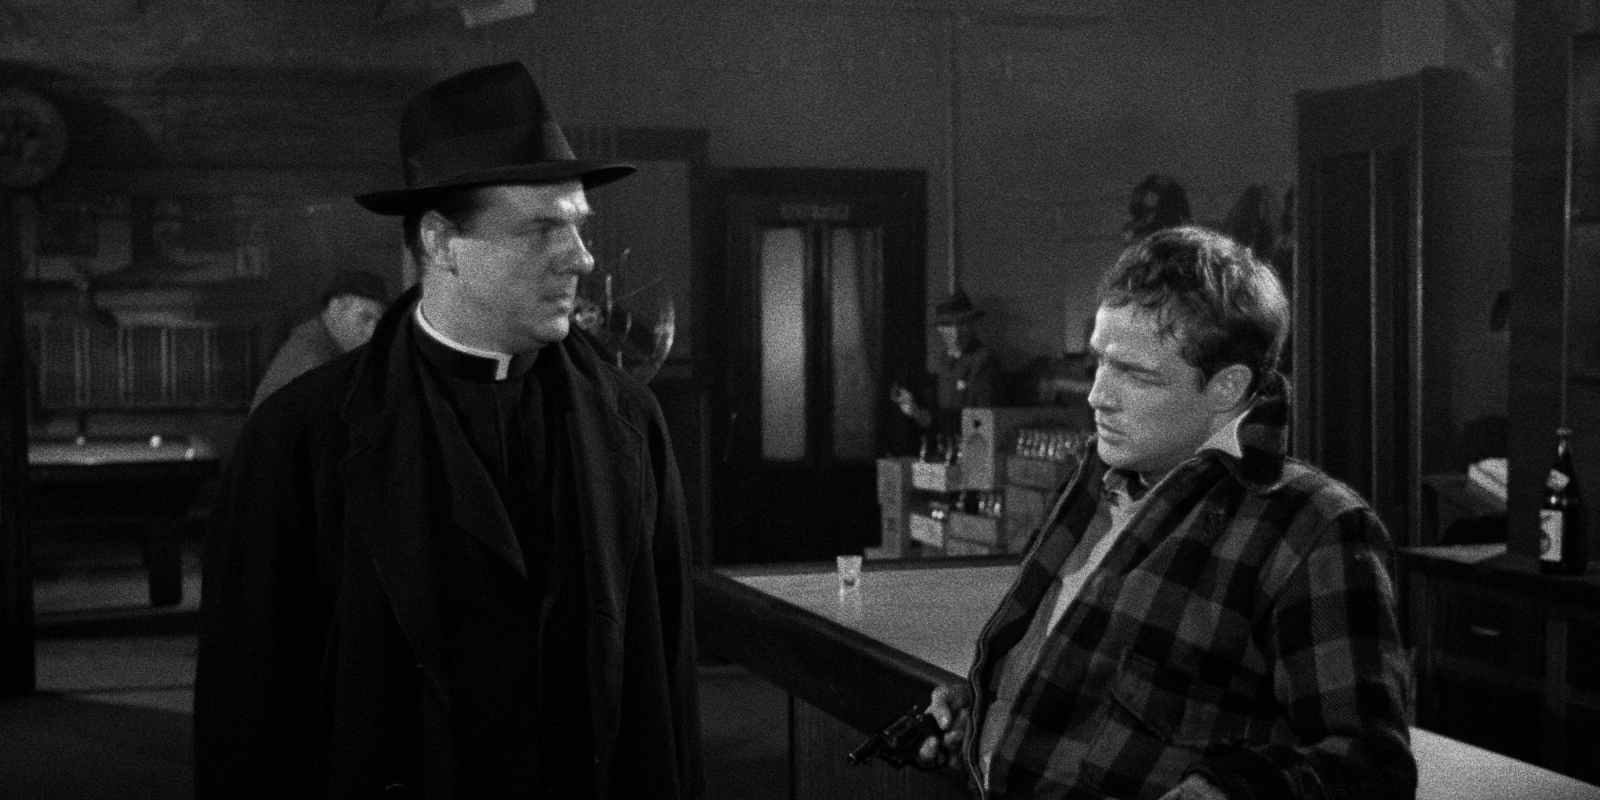 Marlon Brando in On The Waterfront leans against a bar.